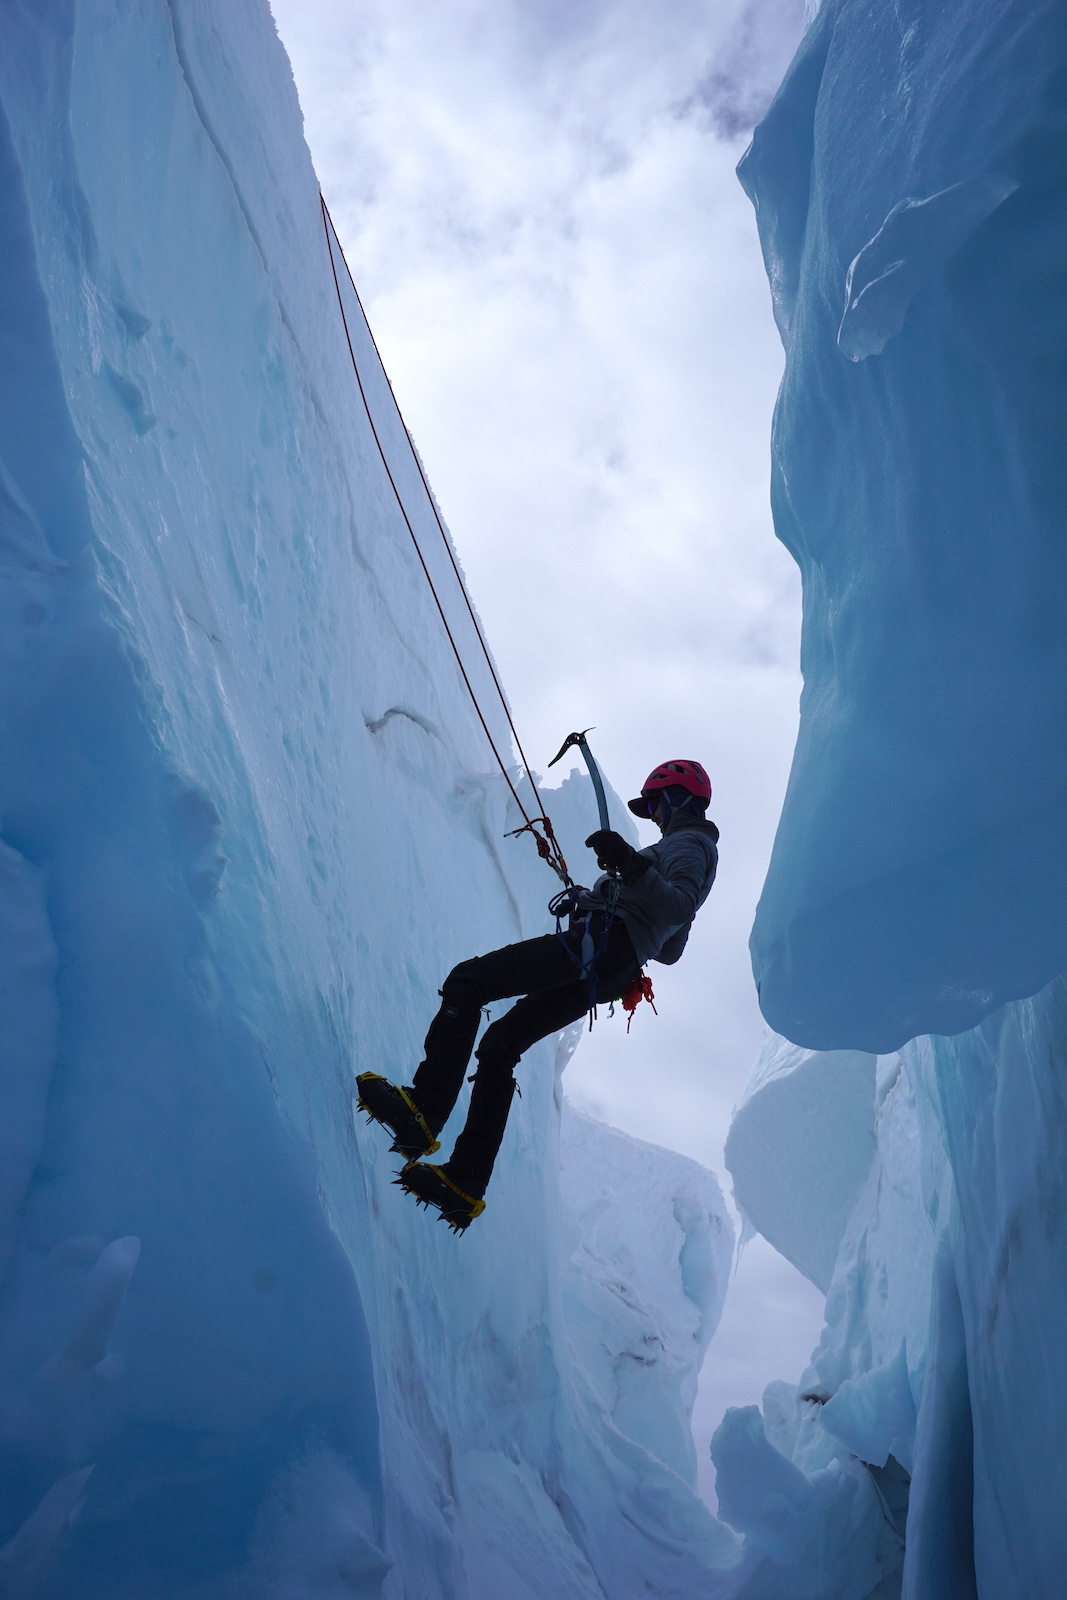 A climber rappels down into a crevasse wearing crampons and holding ice axes